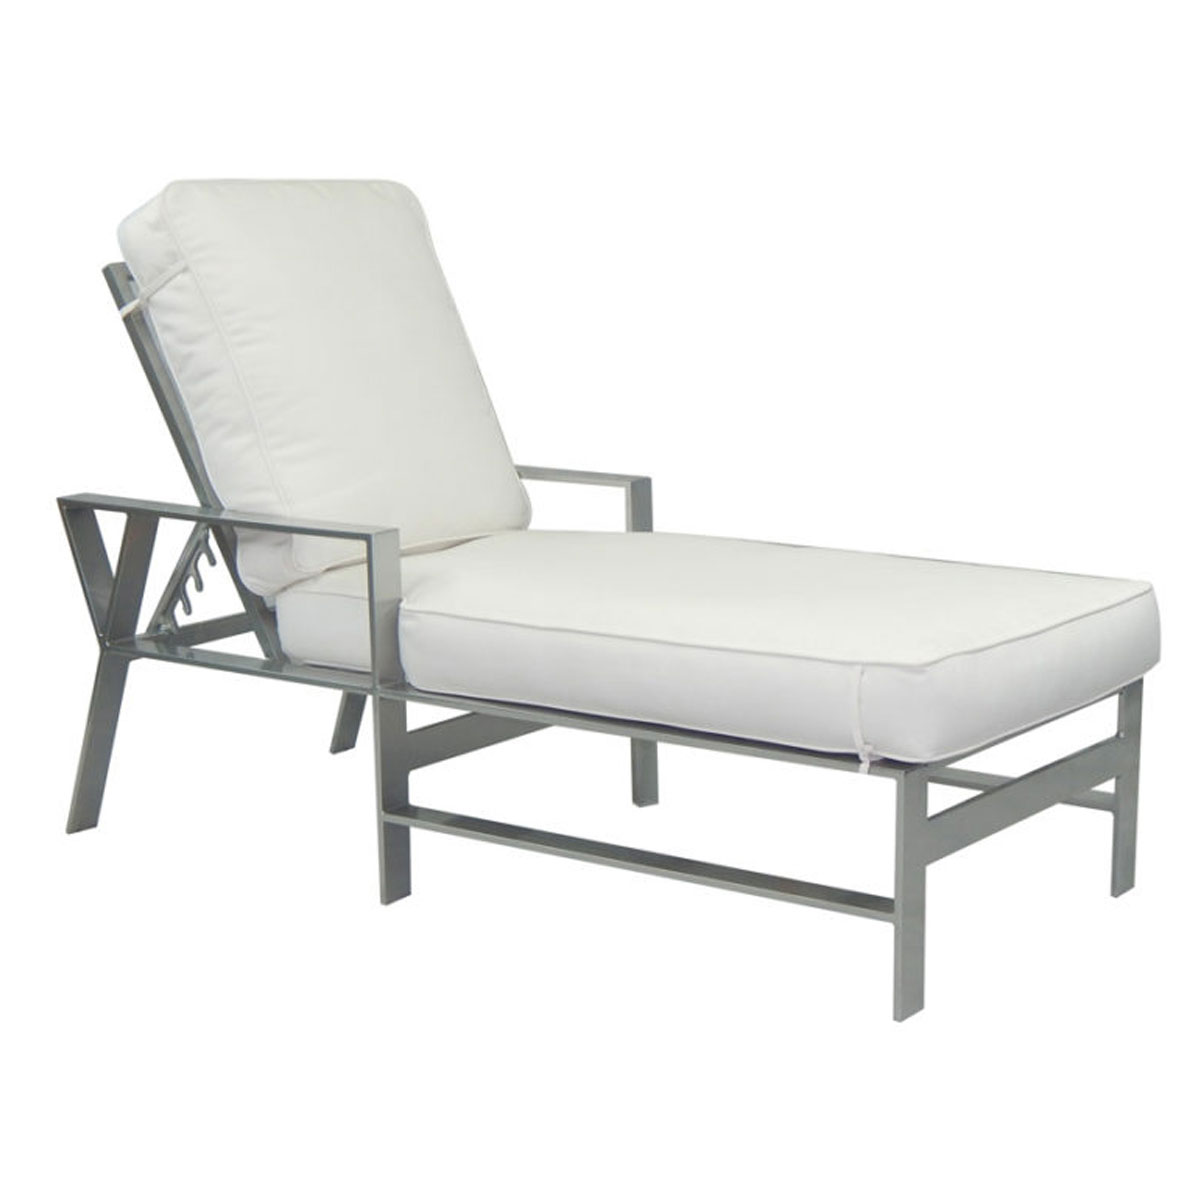 Castelle Trento Adjustable Cushioned Chaise Lounge